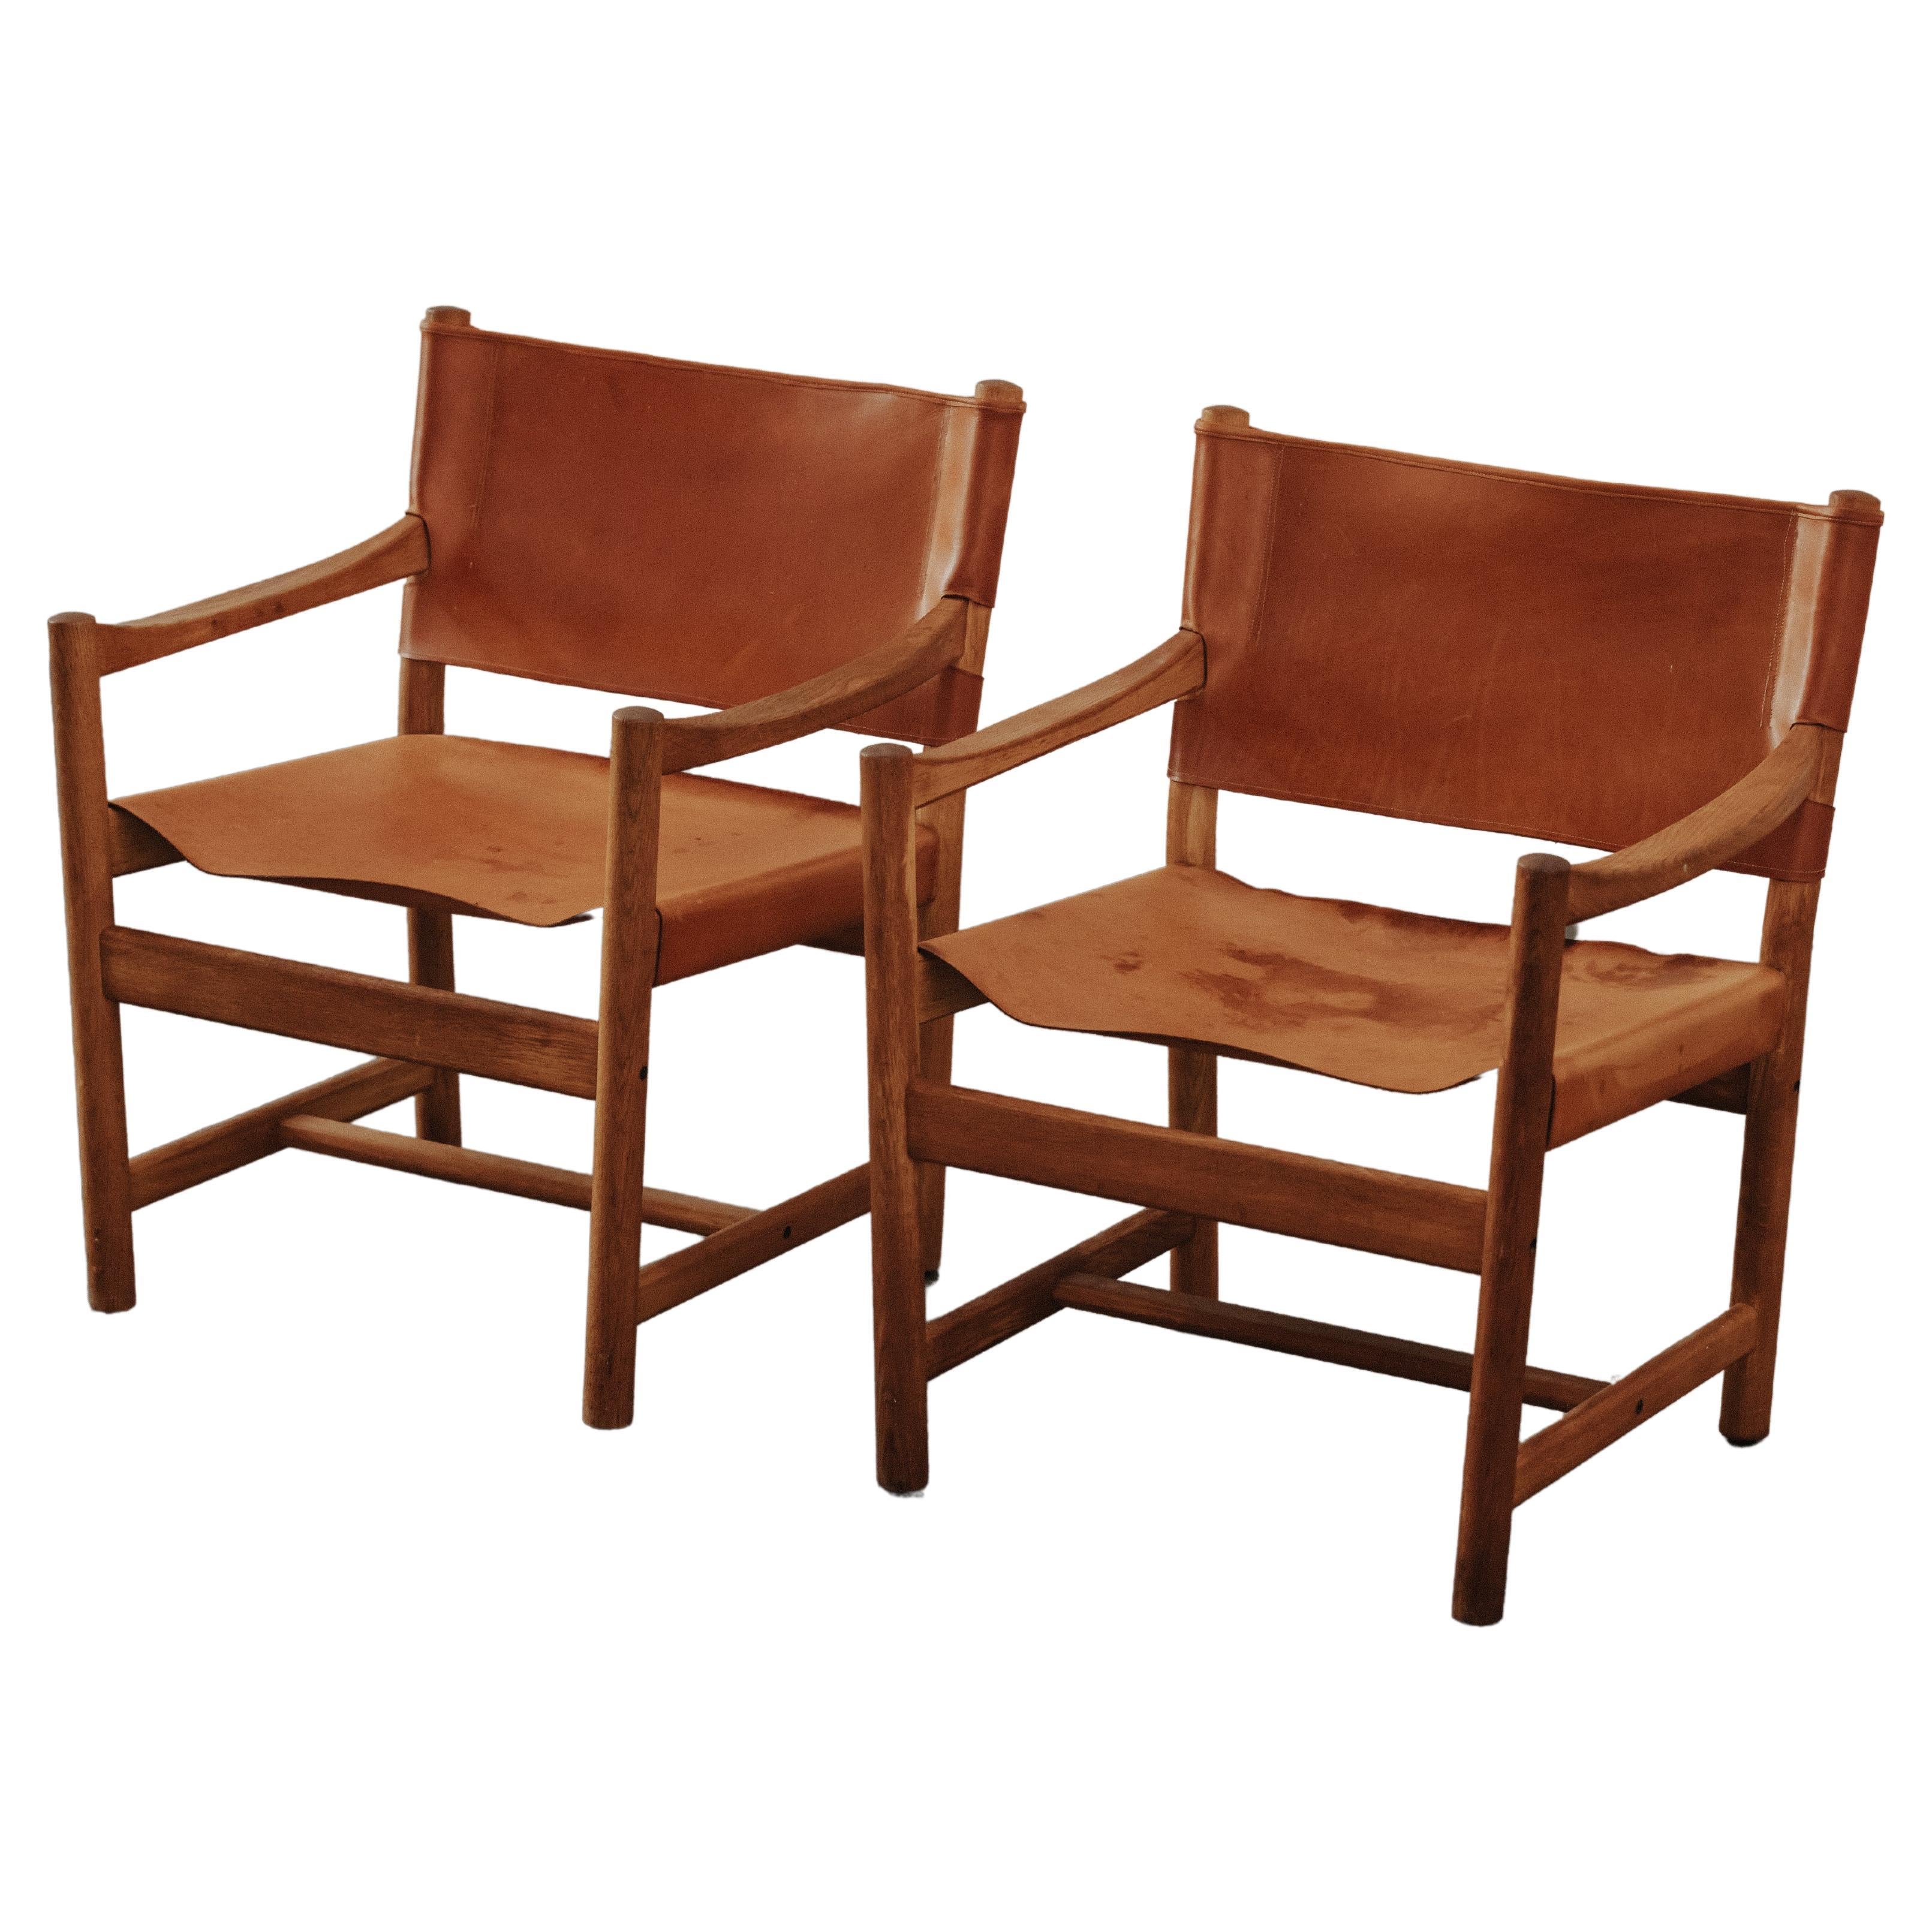 Vintage Pair Of Cognac Leather Lounge Chairs From Denmark, Circa 1970 For Sale